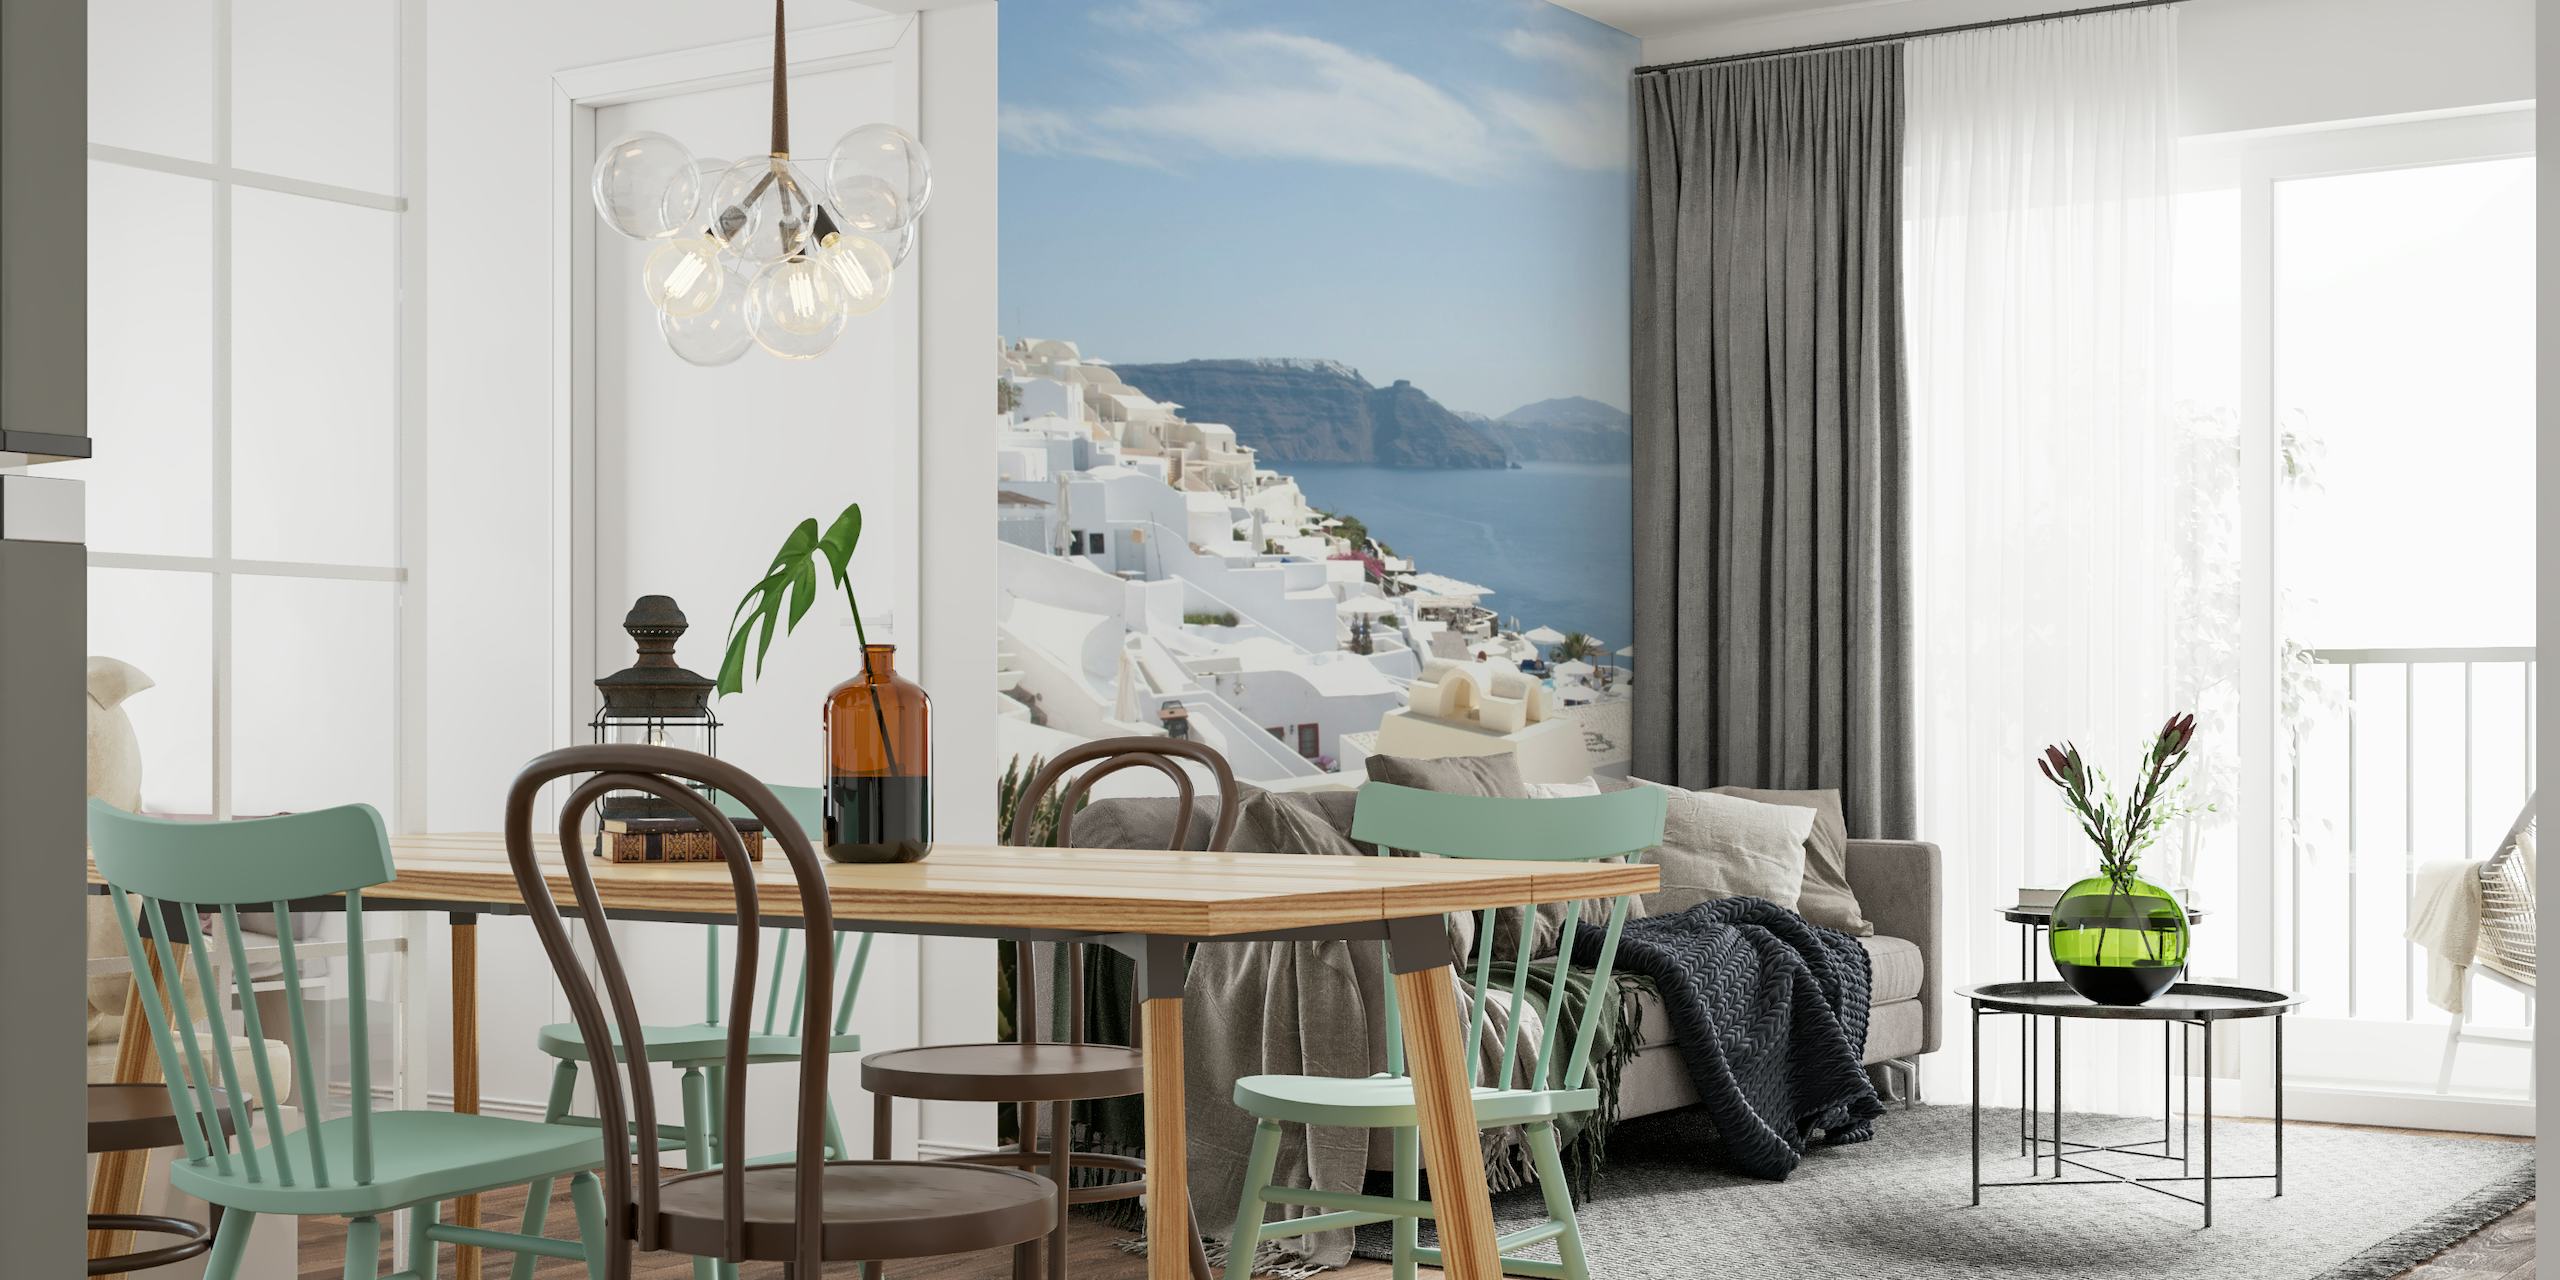 Santorini Oia village scene wall mural with clear skies and Aegean Sea view